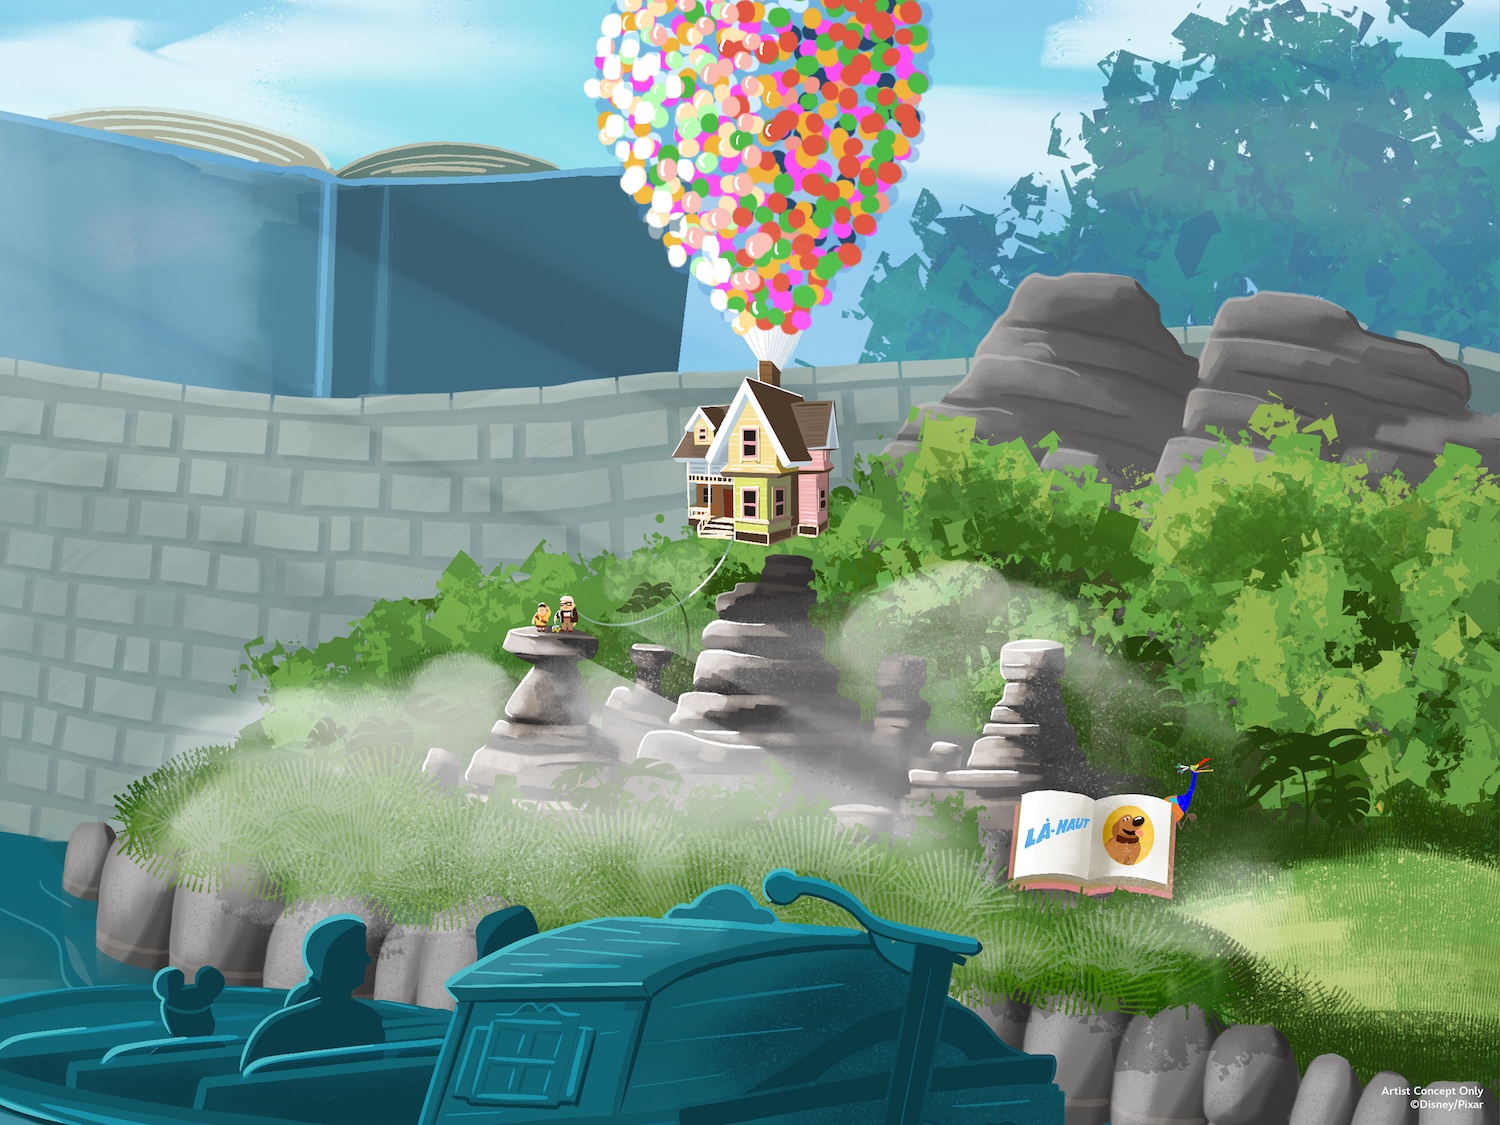 New Scene from Pixar’s “Up” Coming to Storybook Land, With Presenting Sponsor